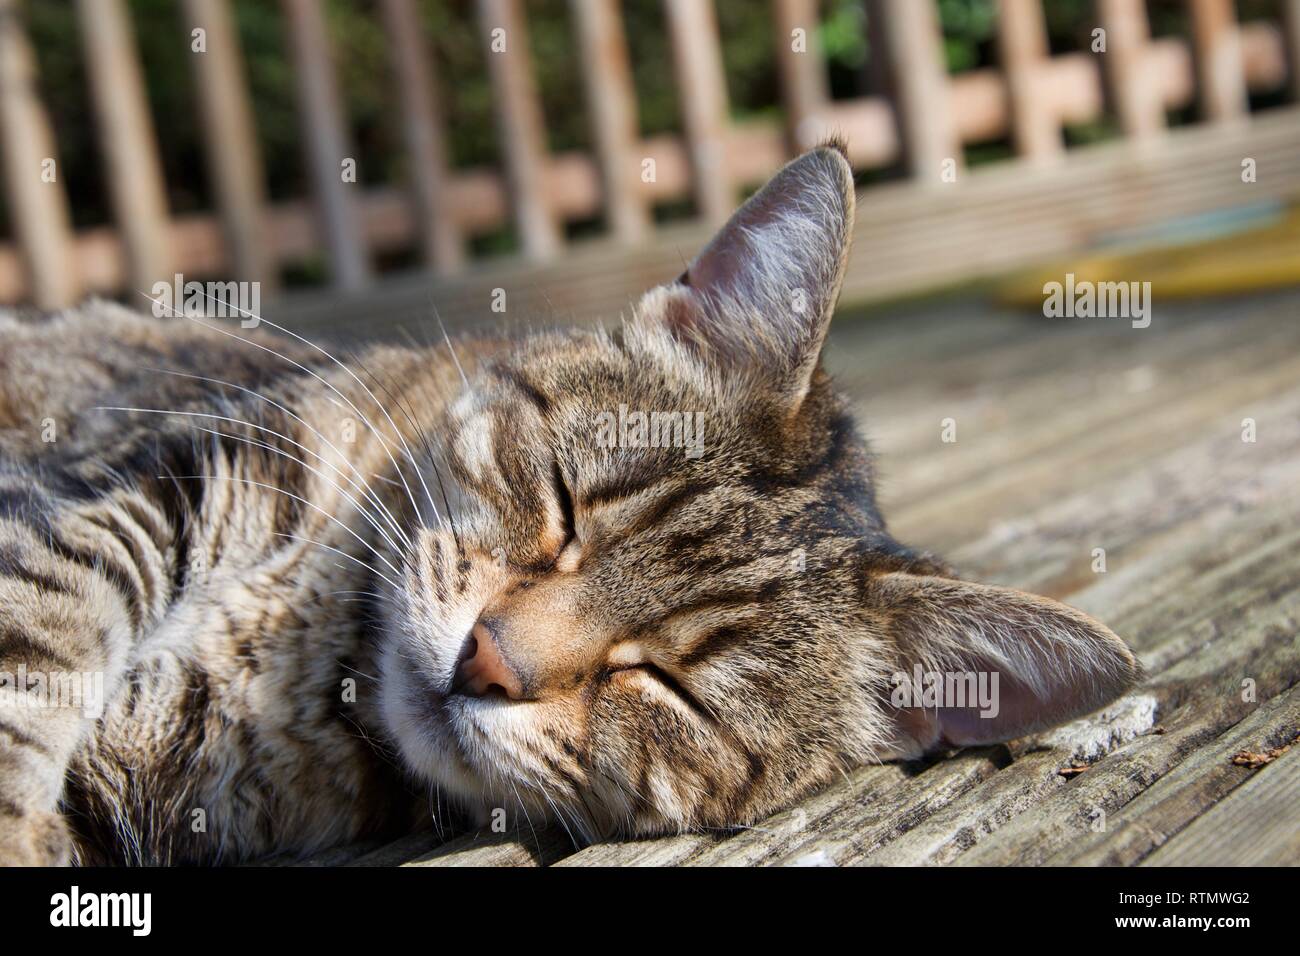 Close up on the head of a small brown striped female pet cat. She is resting, stretched out in sunlight on wooden outdoor decking with a garden fence  Stock Photo